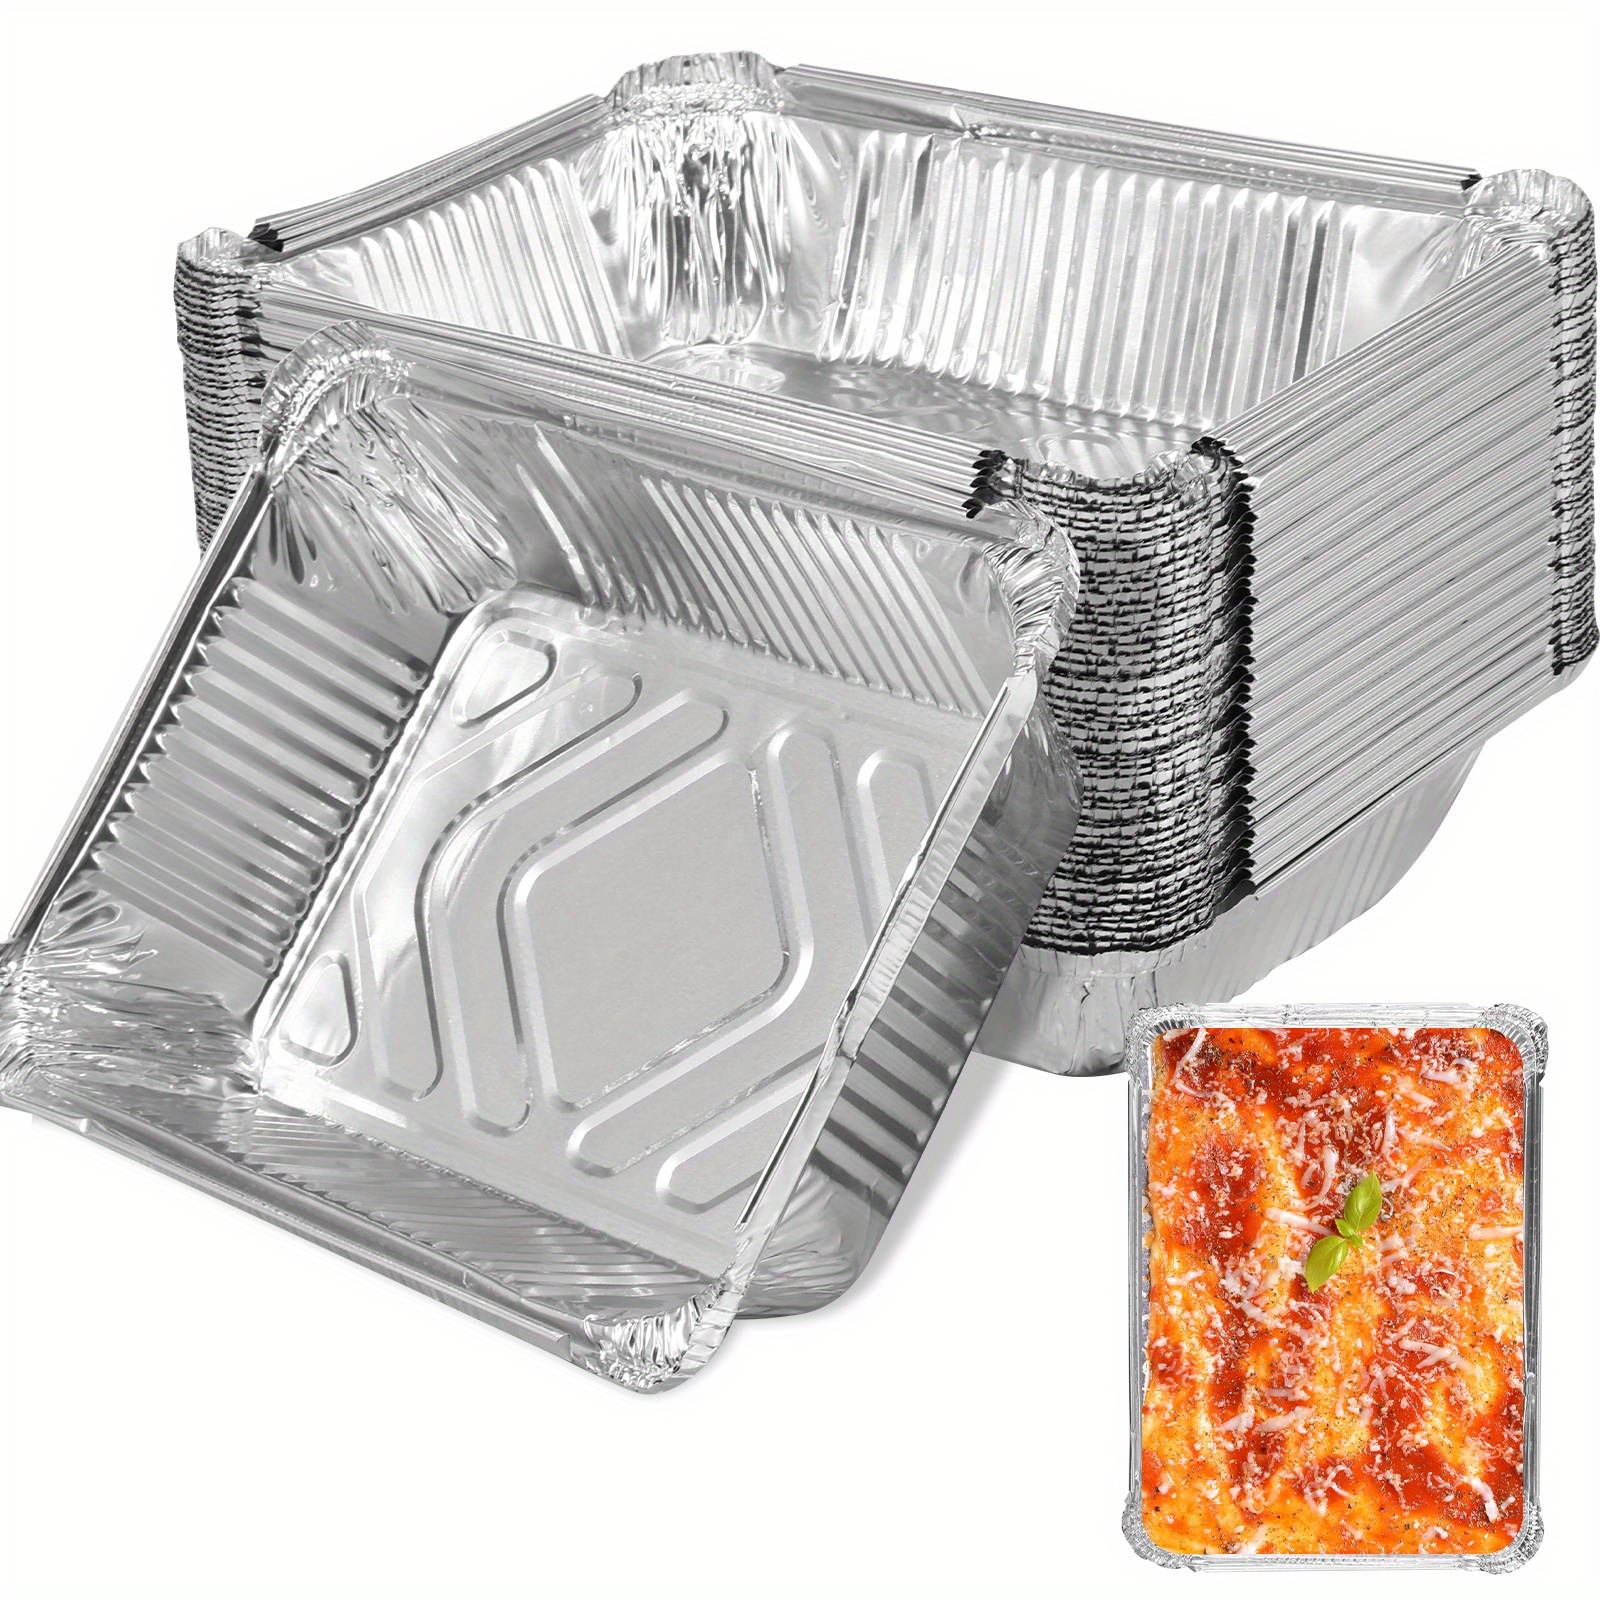 Cooking with Aluminum Foil